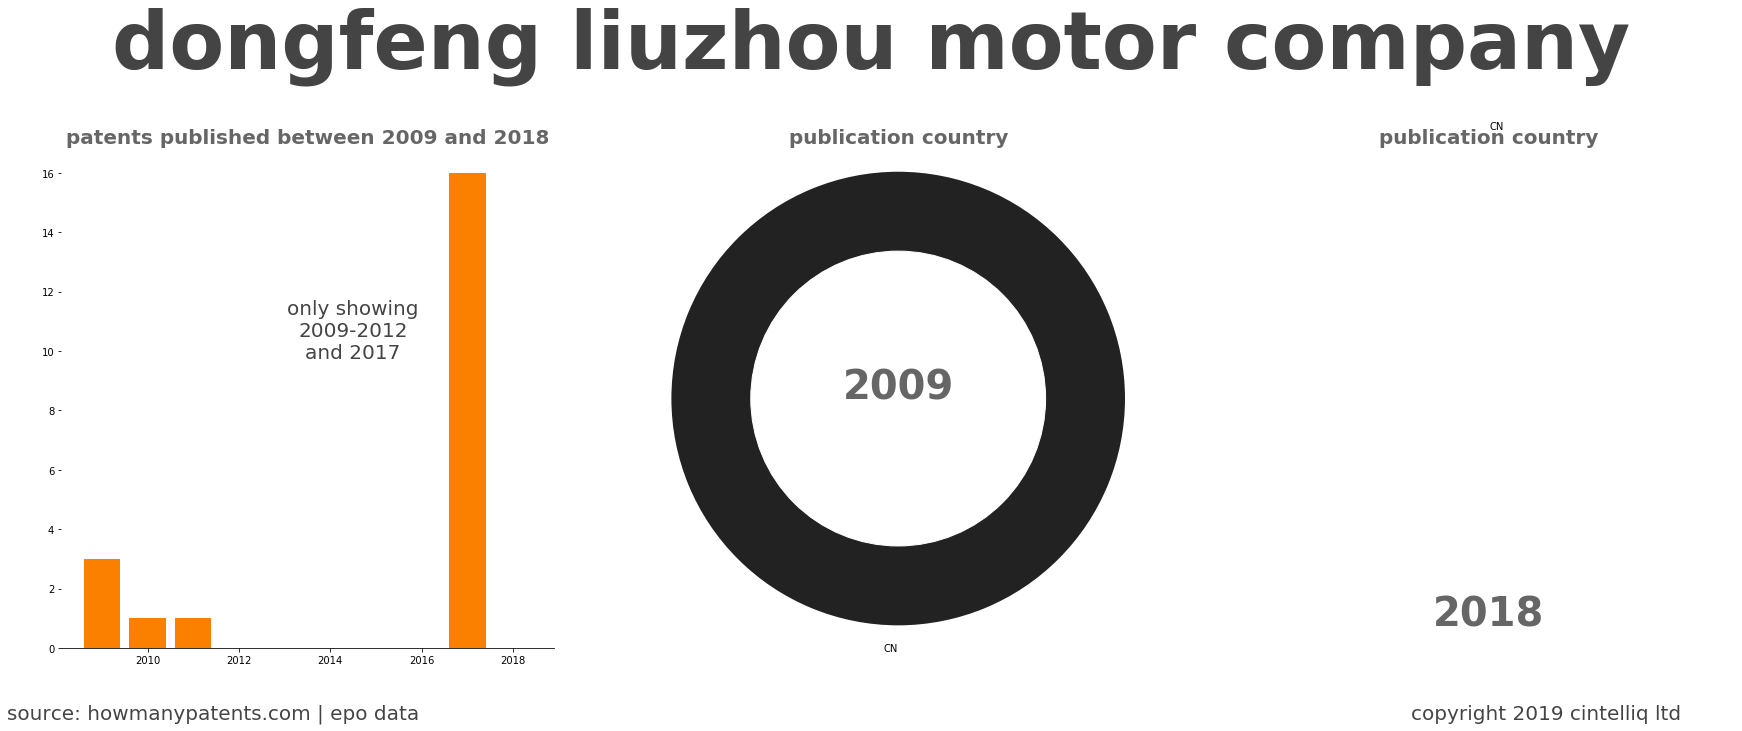 summary of patents for Dongfeng Liuzhou Motor Company